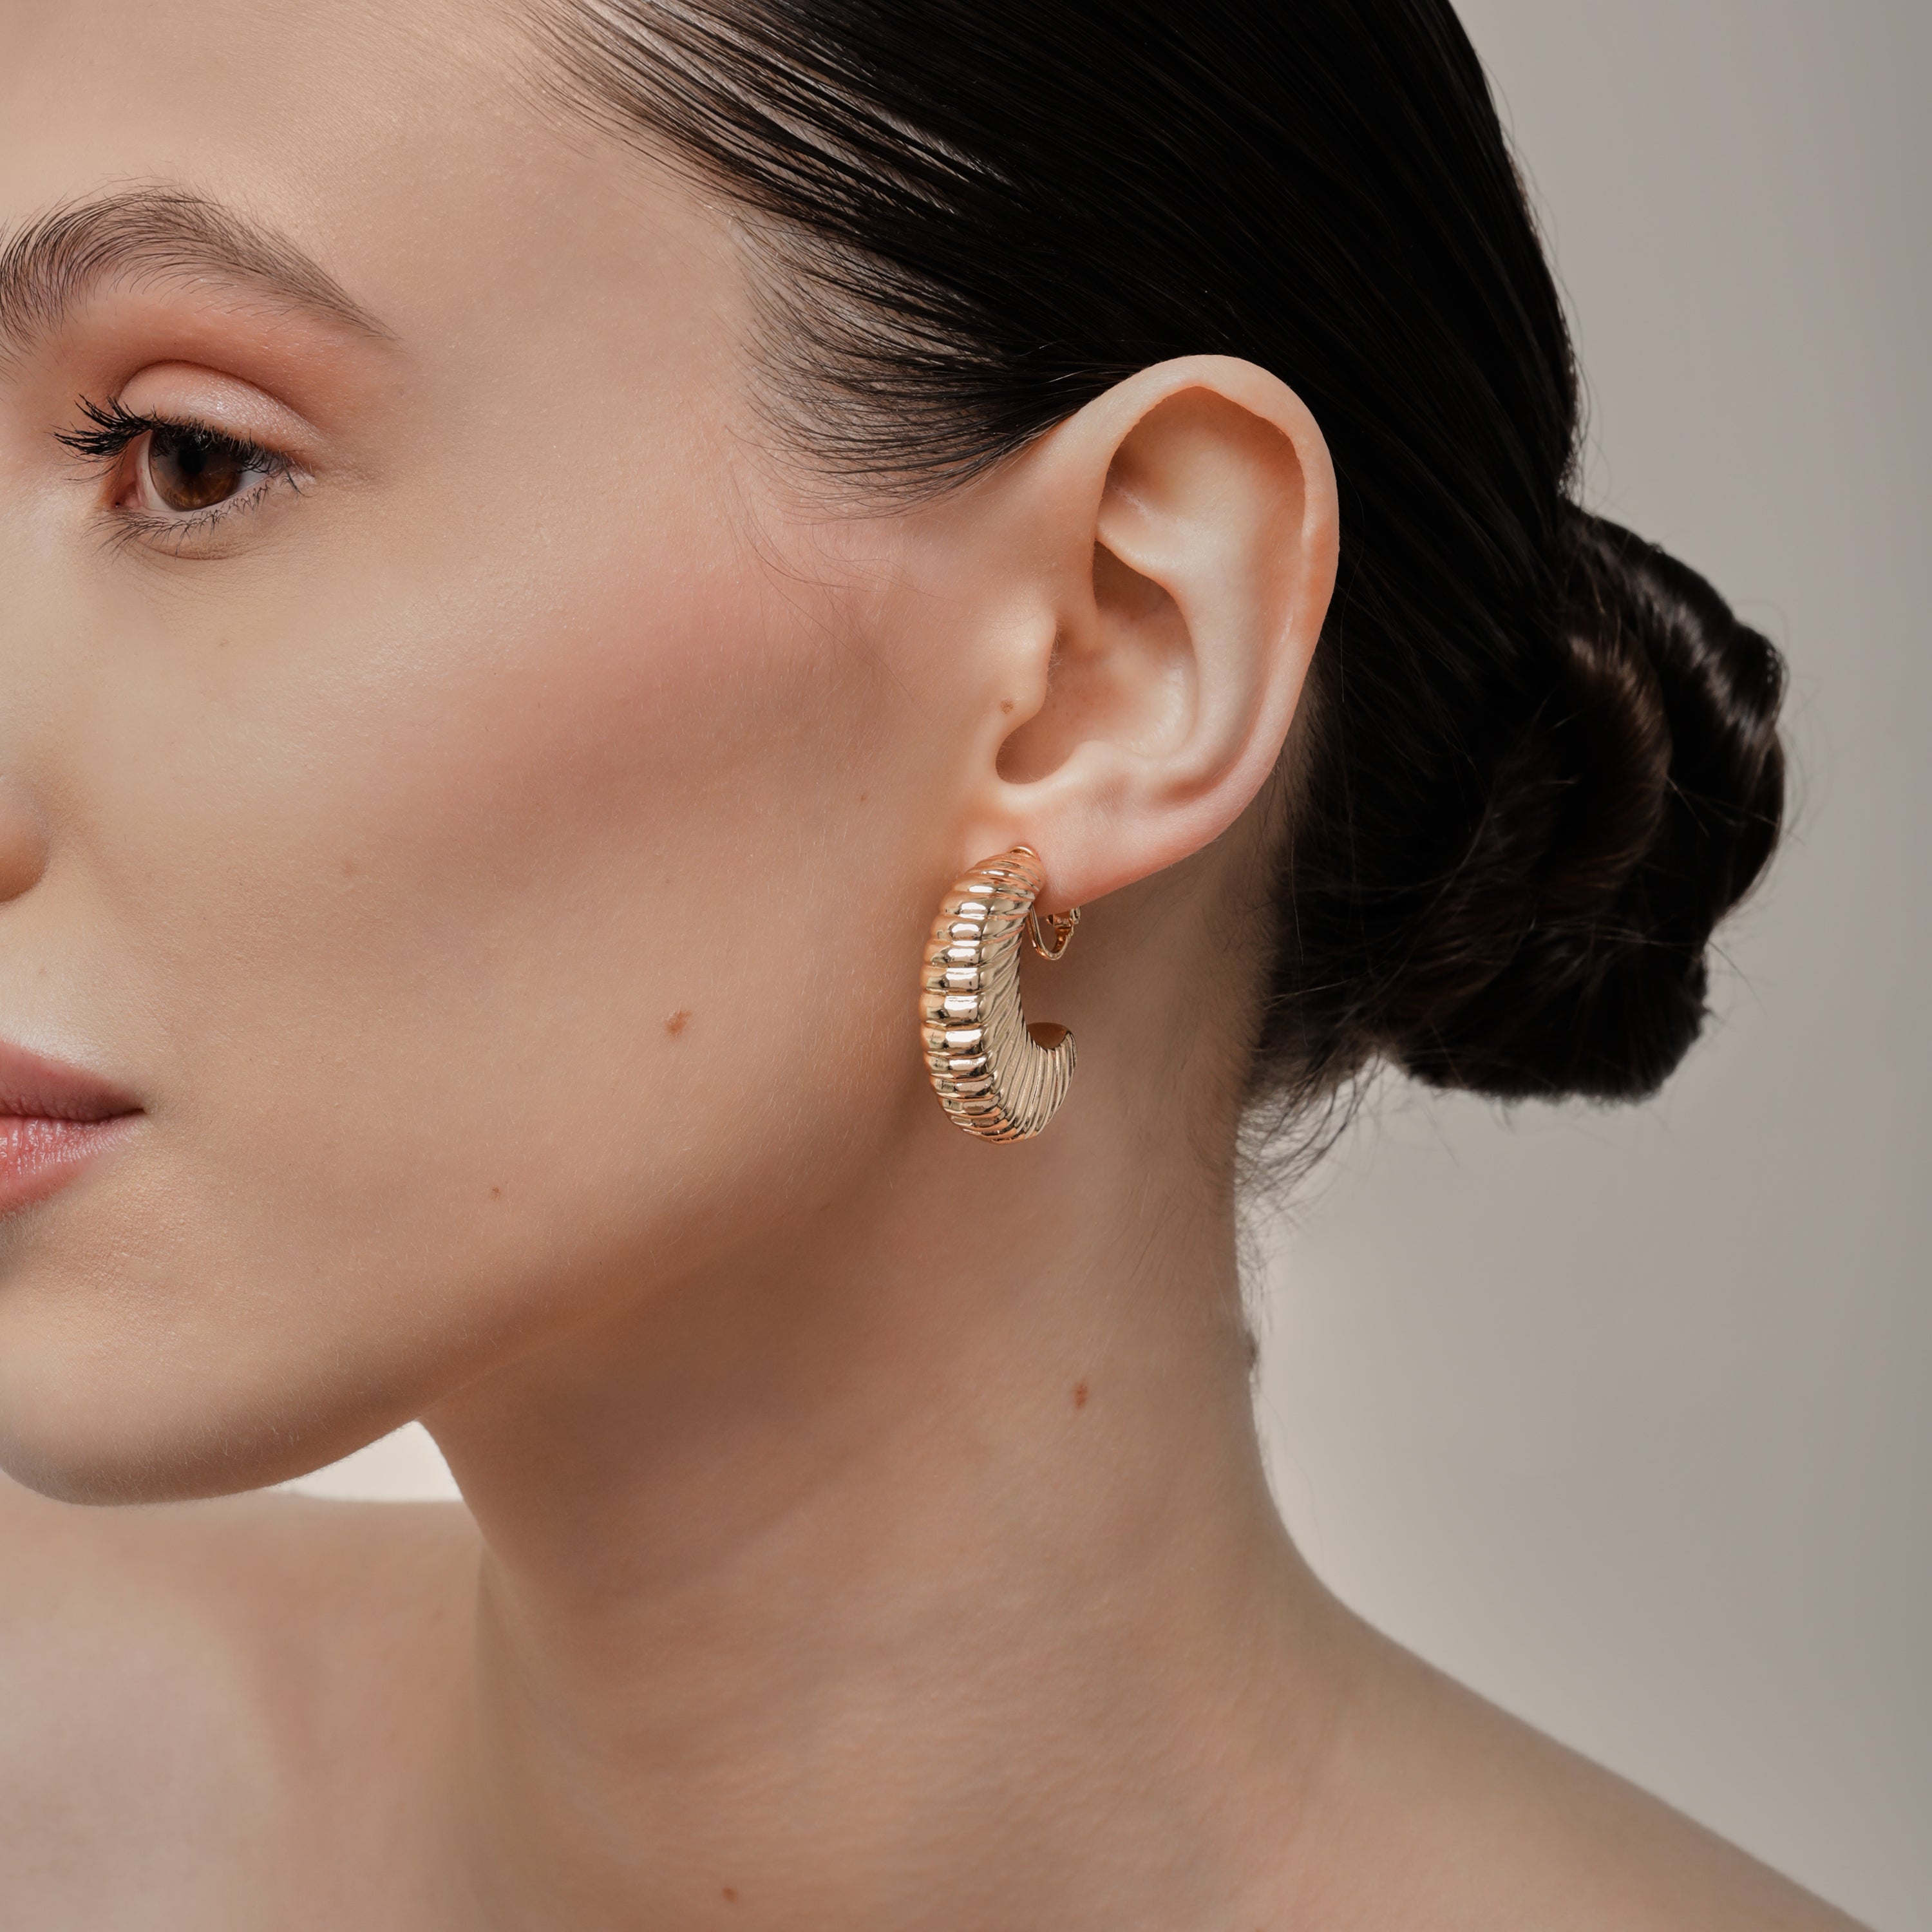 A model wearing the Deco Hoop Clip On Earrings in Gold. Designed with a screwback closure, these earrings provide a secure hold for all types of ears. Whether you have thick, sensitive, small, or keloid prone ears, these earrings can be manually adjusted to fit your size. Enjoy 8-12 hours of wear in these elegant, versatile earrings.